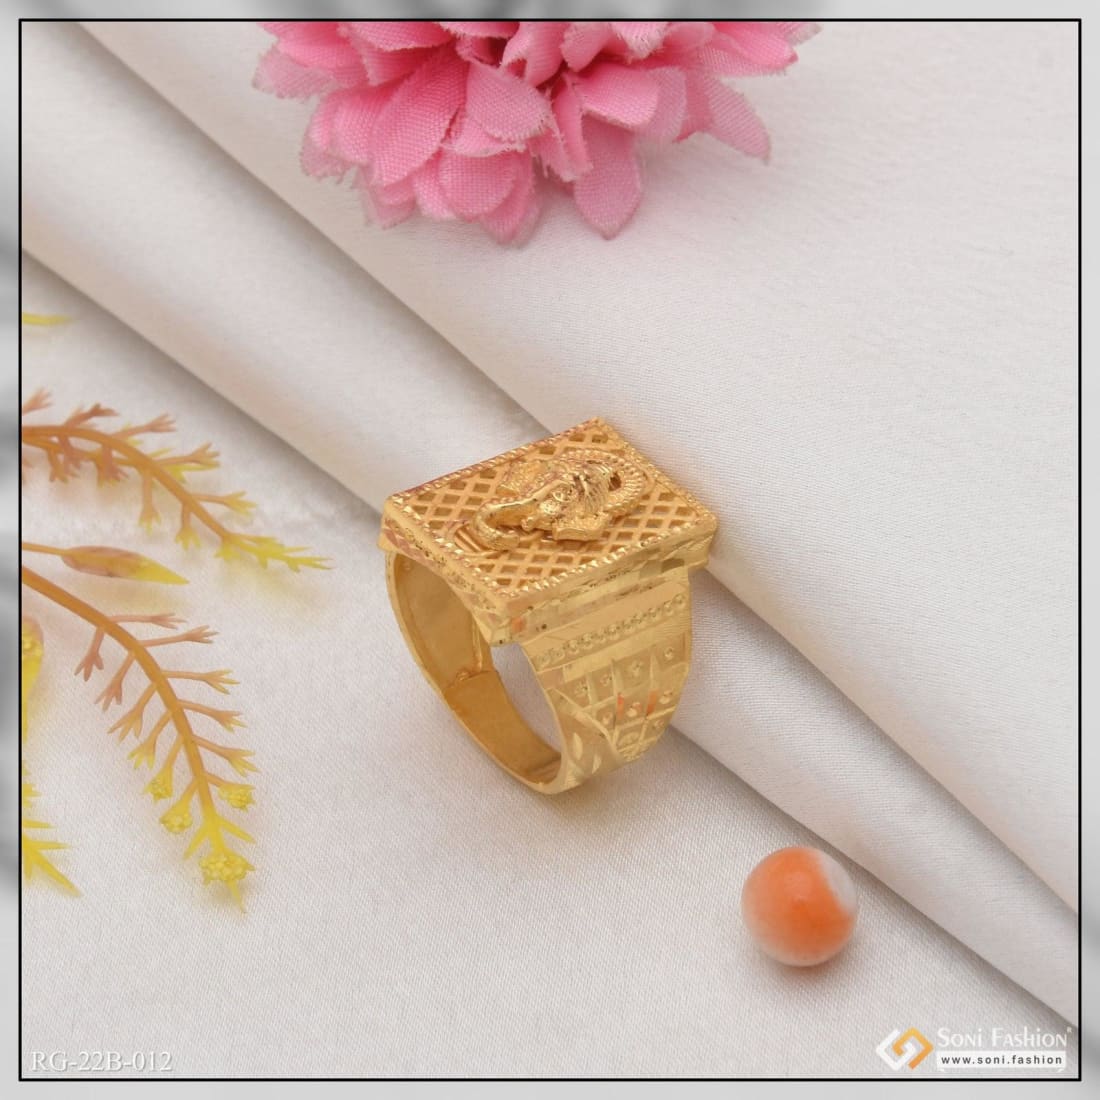 4.2gram Handmade Authentic 14k Gold Ring Flower Filigree Nature Floral  White and Rose Gold Gift for Her - Etsy